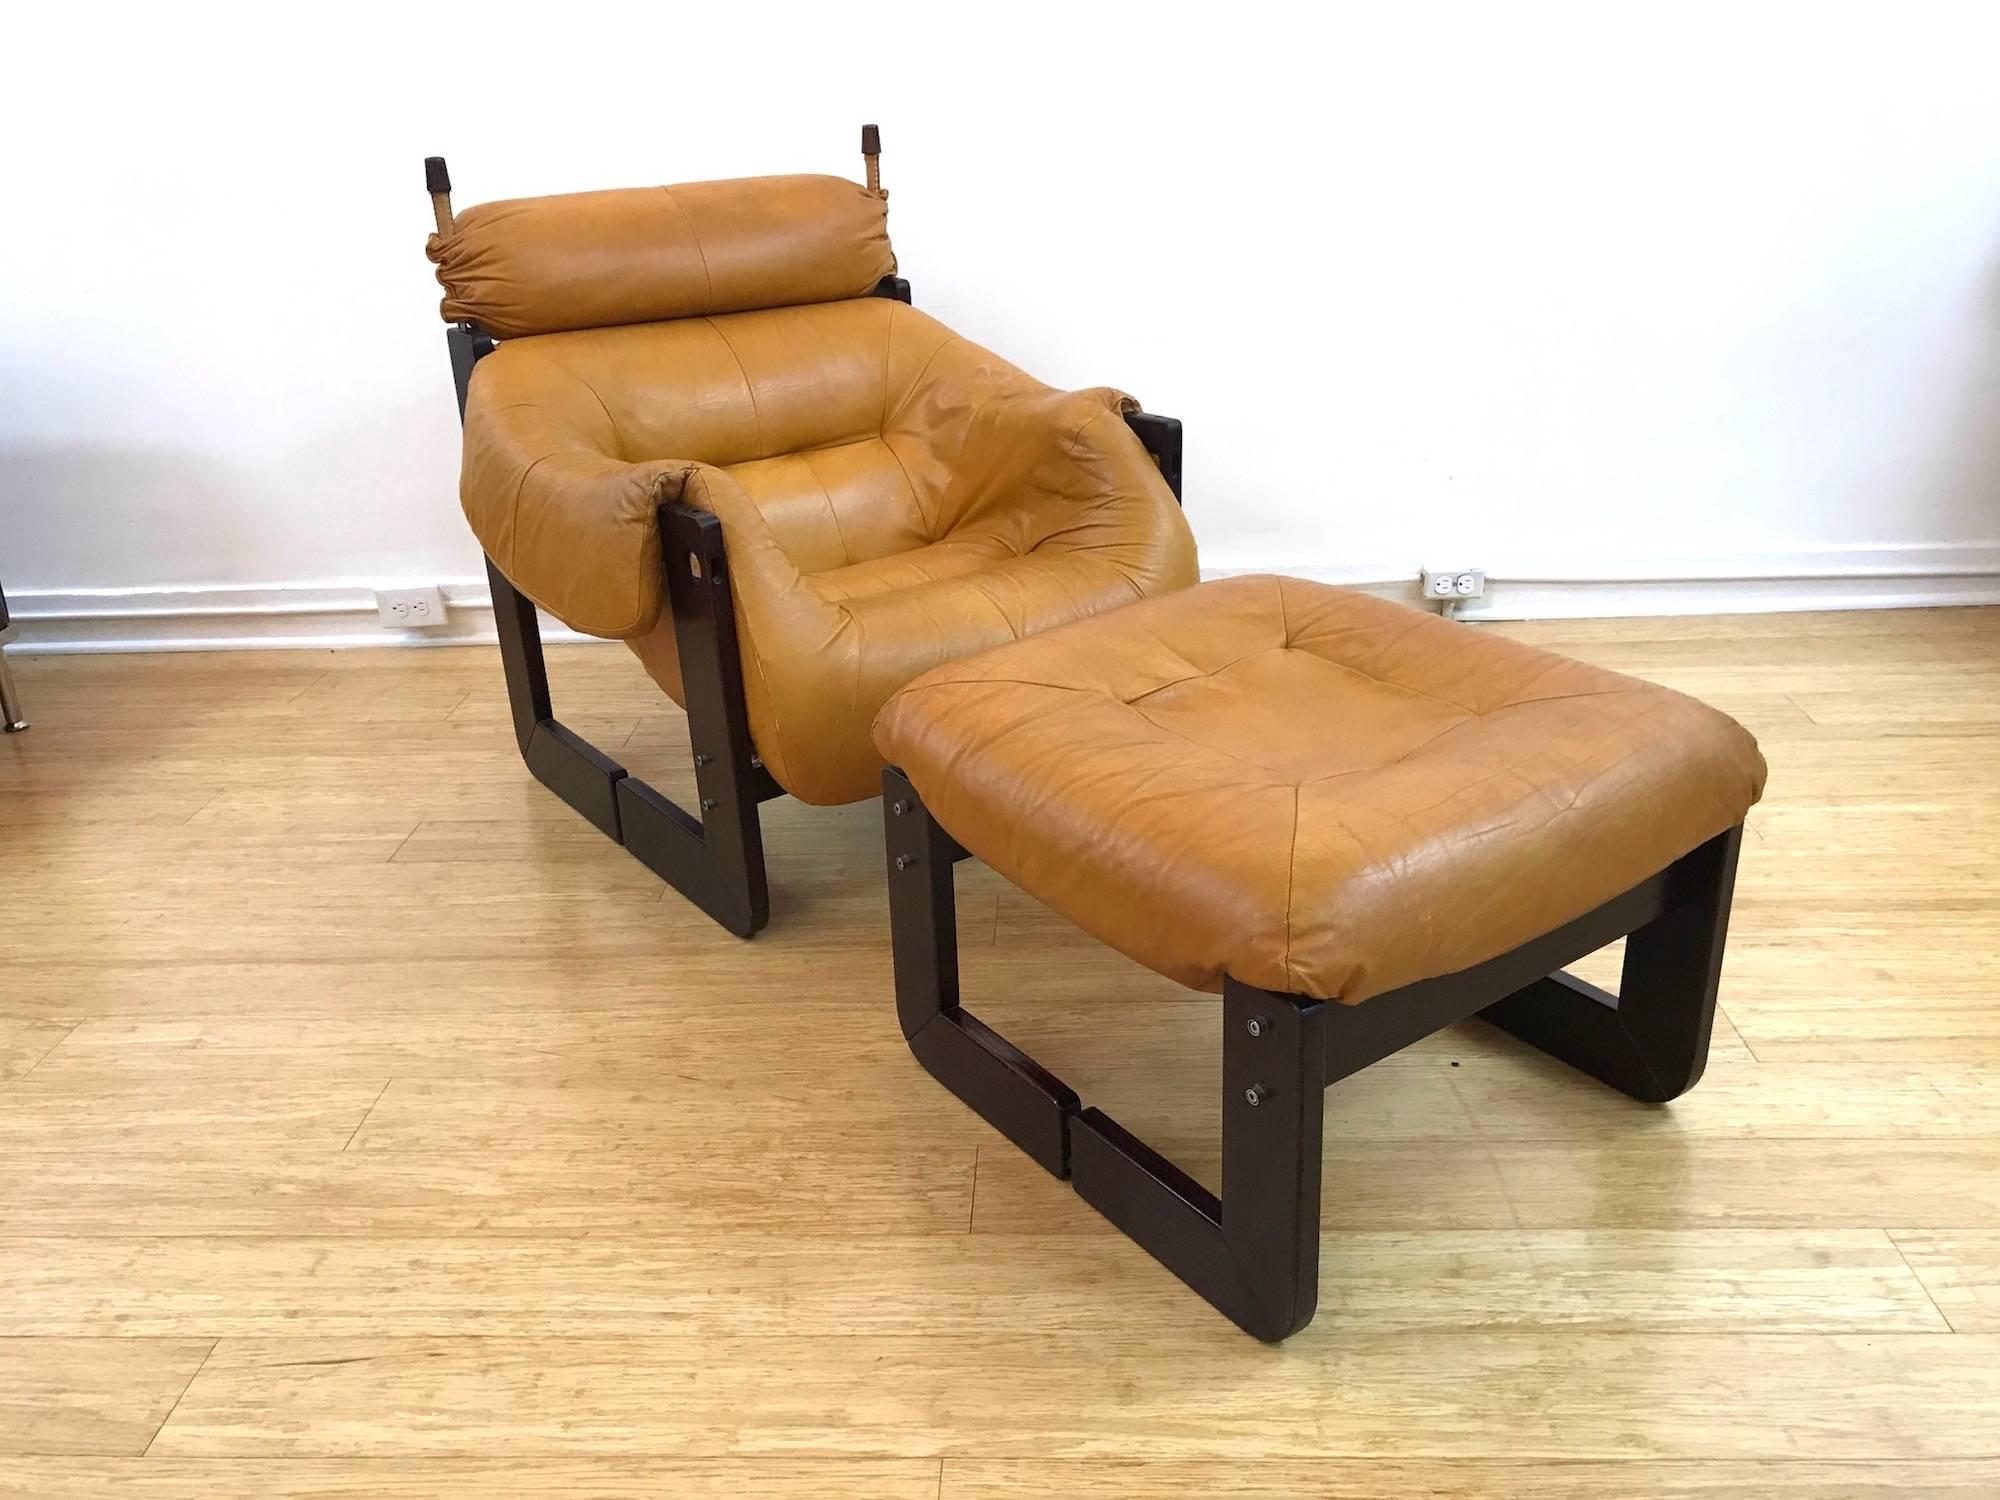 Sculptural MP97 brazilian midcentury armchair and matching ottoman with frame in Jatobah wood with rosewood finish and upholstered in light leather by Percival Lafer, Brazil 1970s.